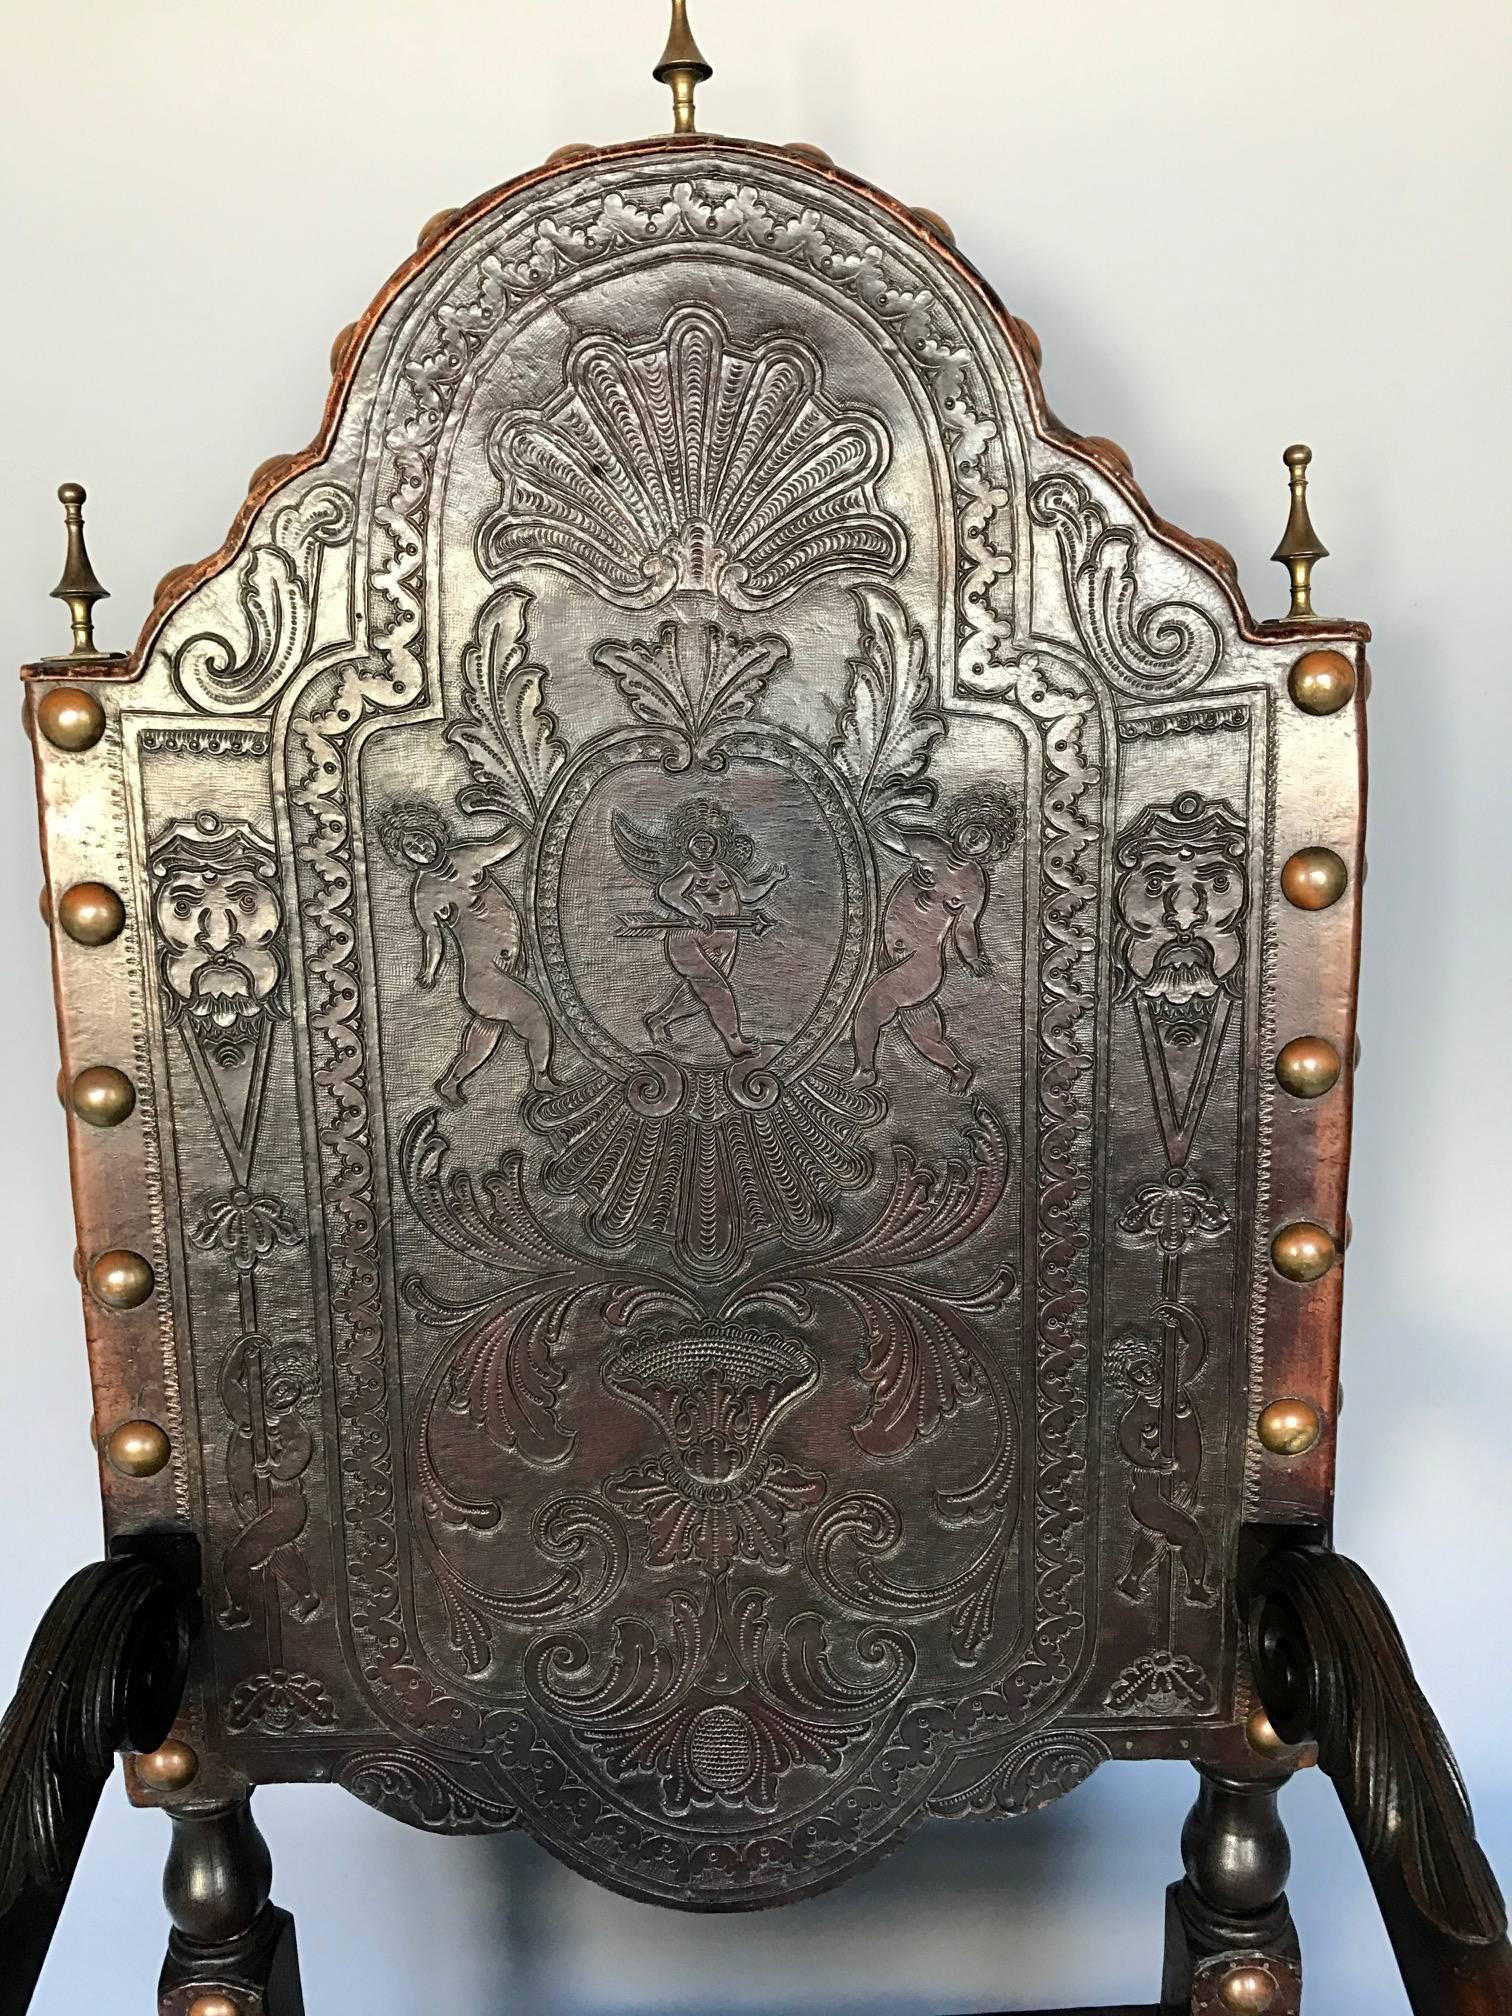 Baroque Revival Antique Portuguese Armchair with Embossed Leather